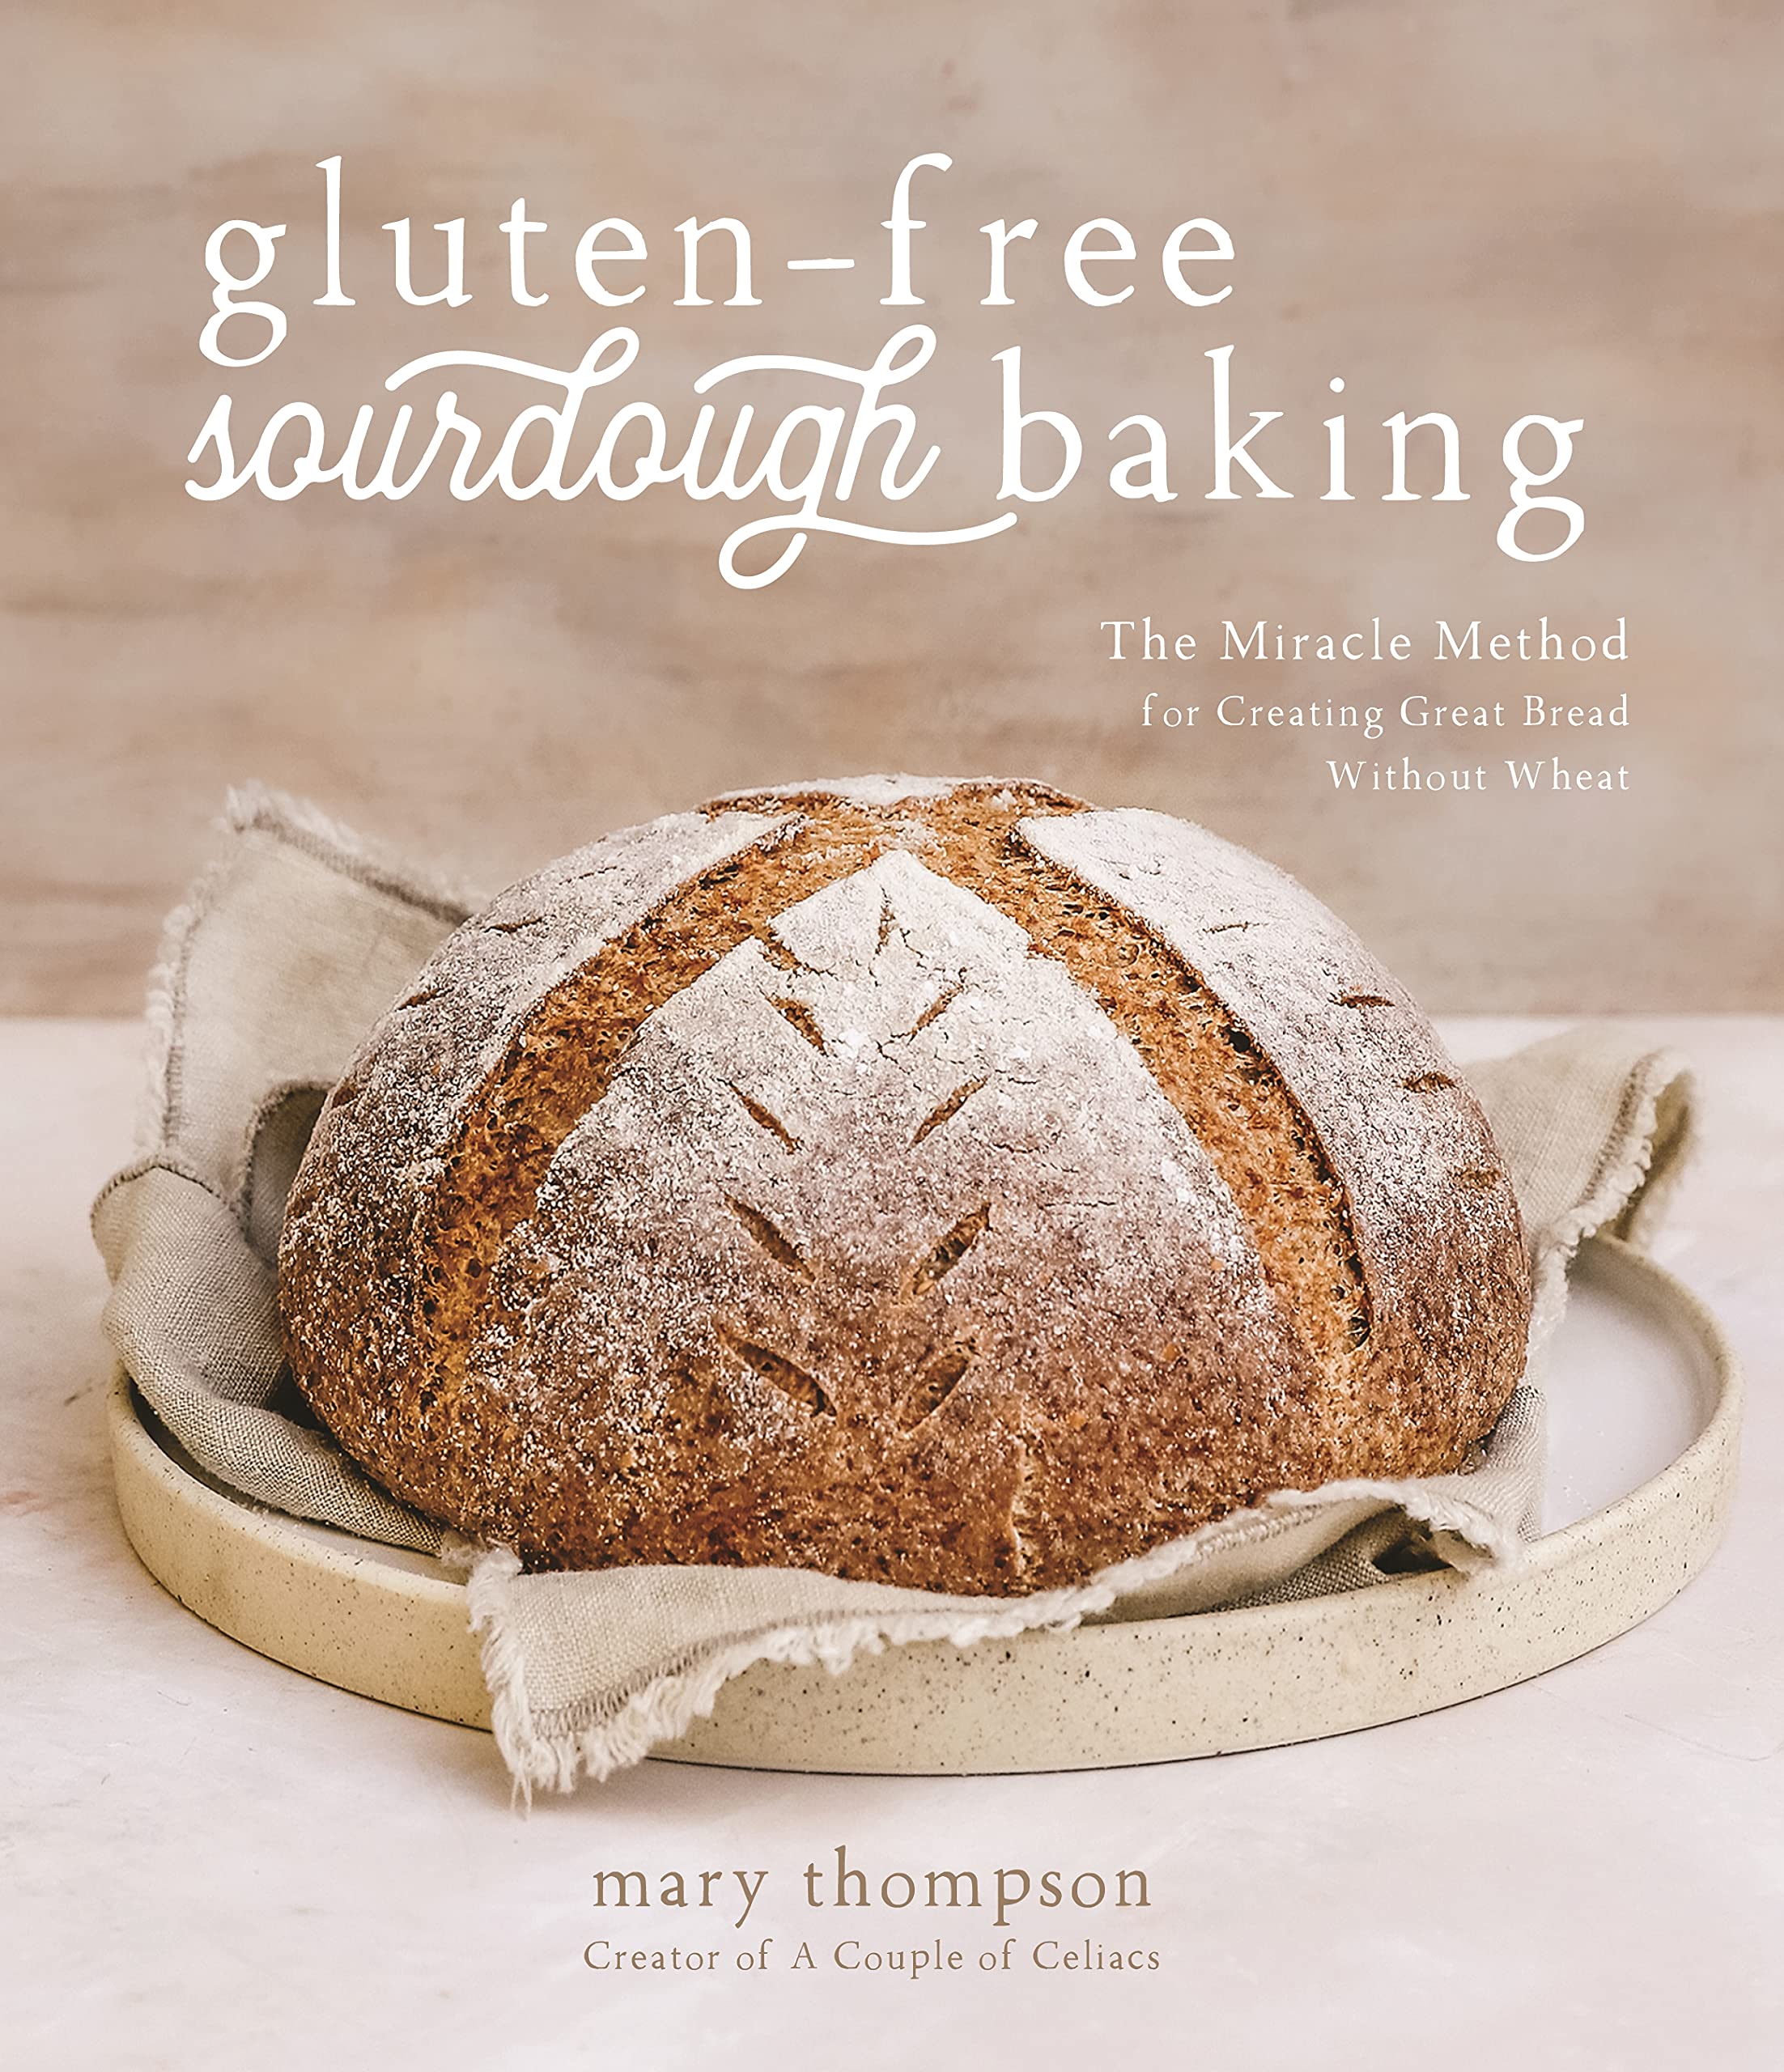 Gluten-Free Sourdough Baking: The Miracle Method for Creating Great Bread Without Wheat (Mary Thompson)